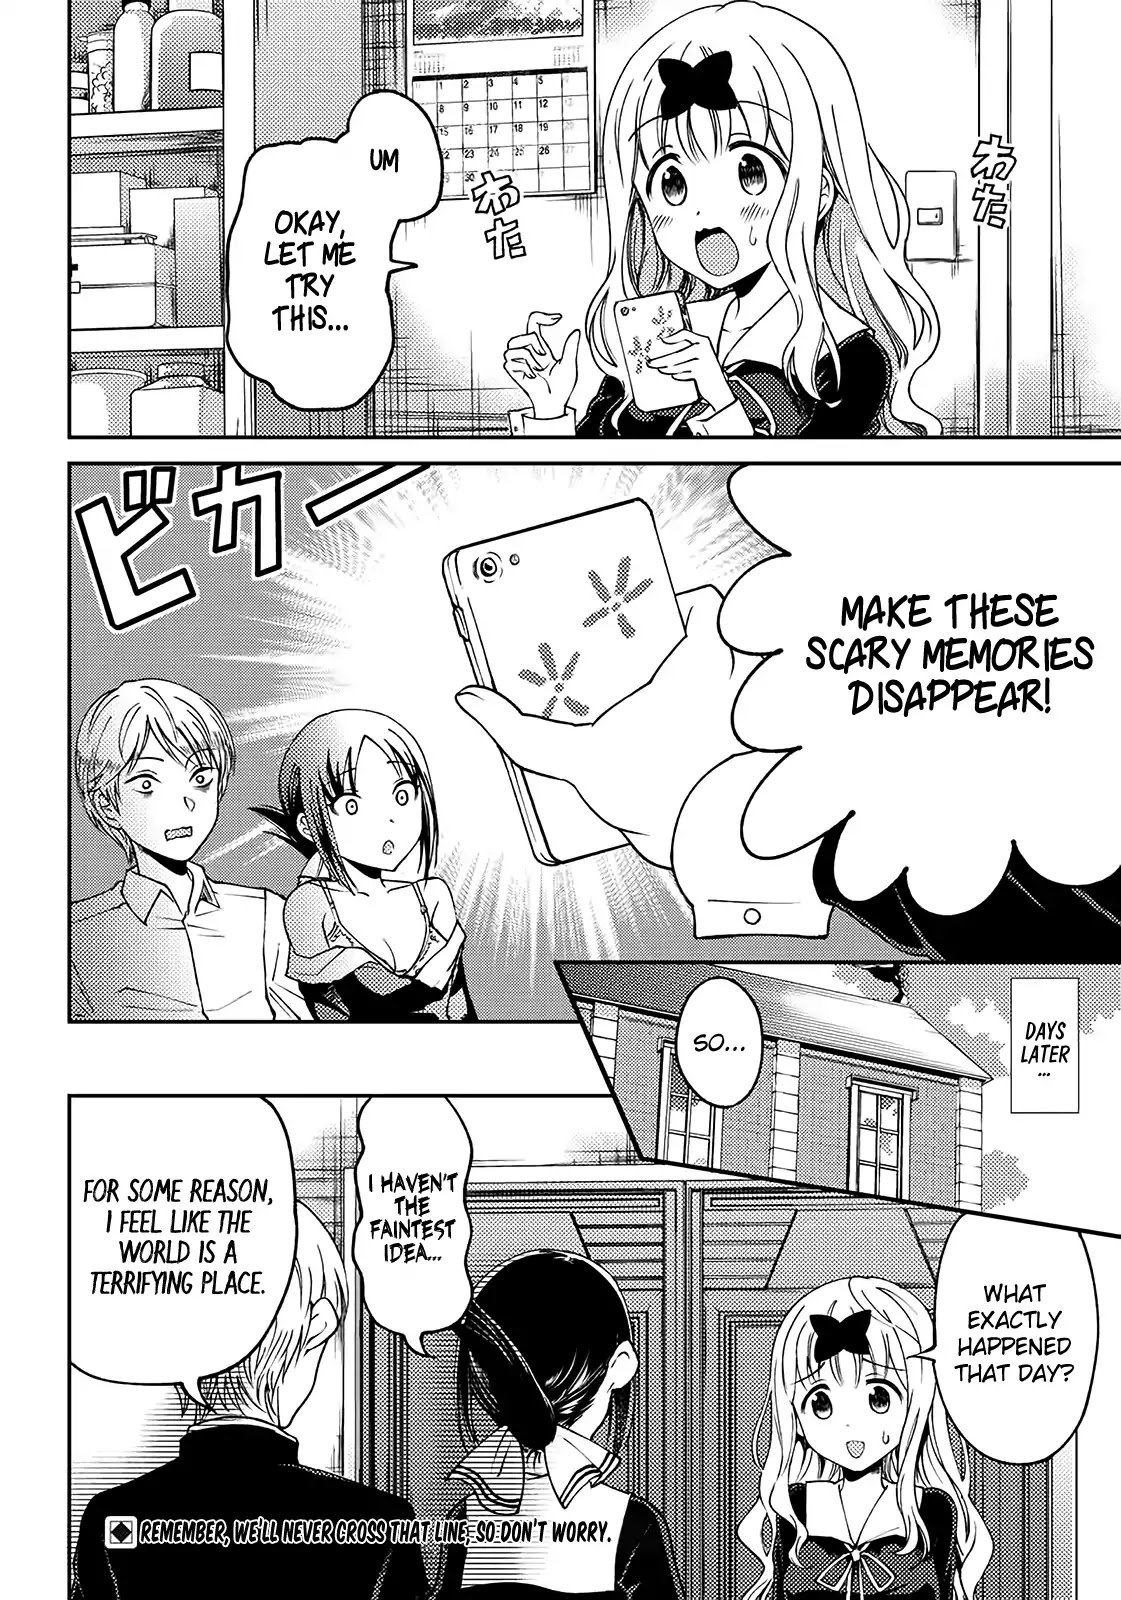 kaguya-wants-to-be-confessed-to-official-doujin-chap-3-21